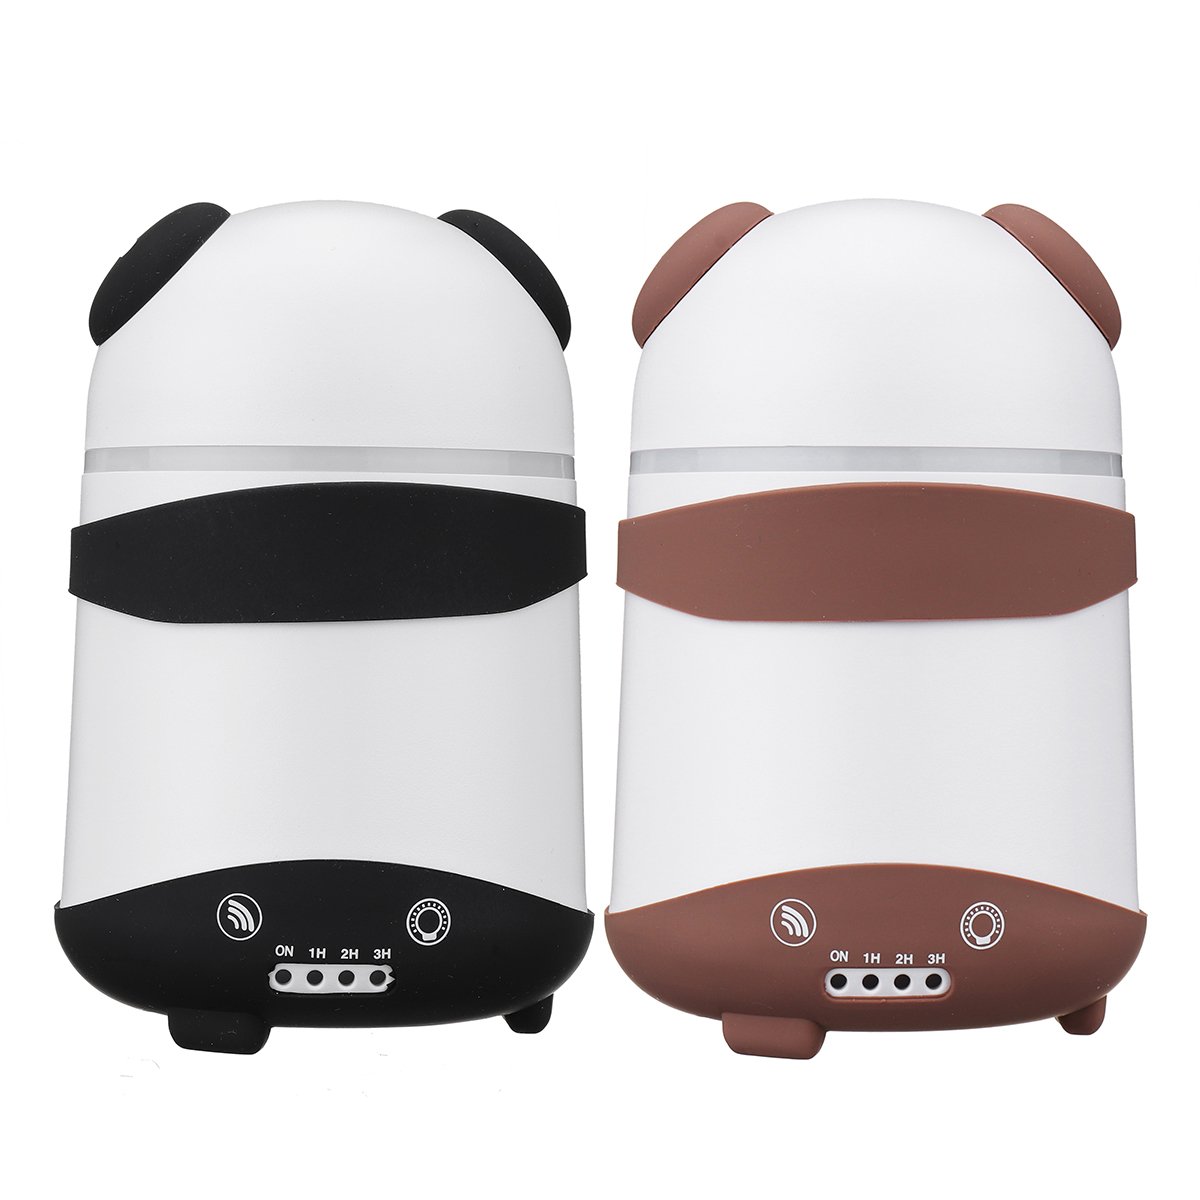 Dual Humidifier Air Oil Diffuser Aroma Mist Maker LED Cartoon Panda Style For Home Office US Plug 2